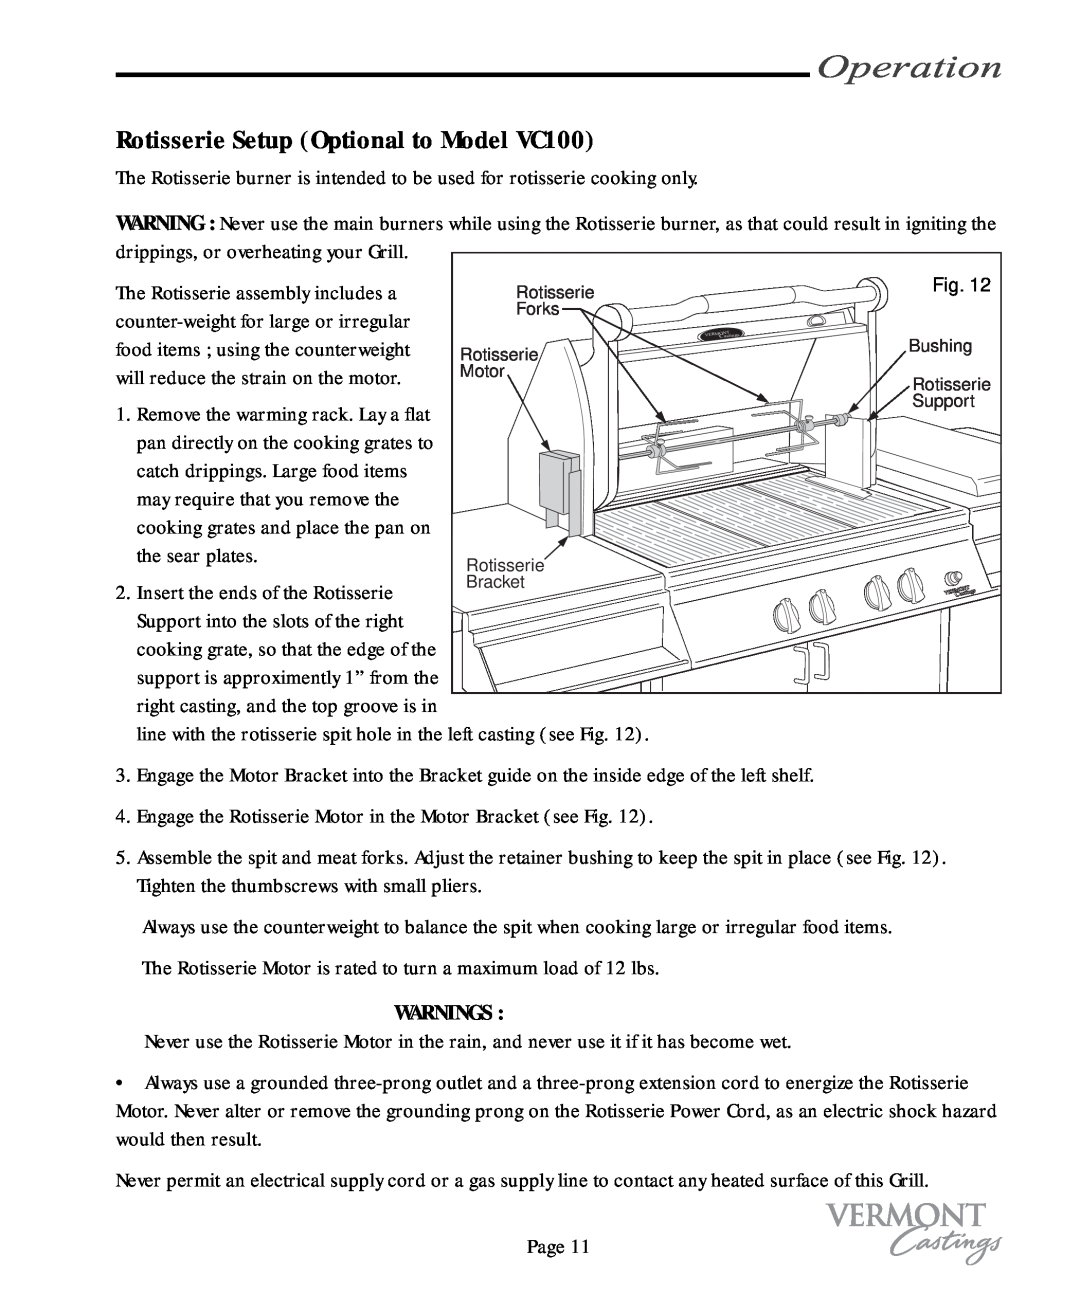 Vermont Casting VC400, VC200 user manual Rotisserie Setup Optional to Model VC100, Operation 